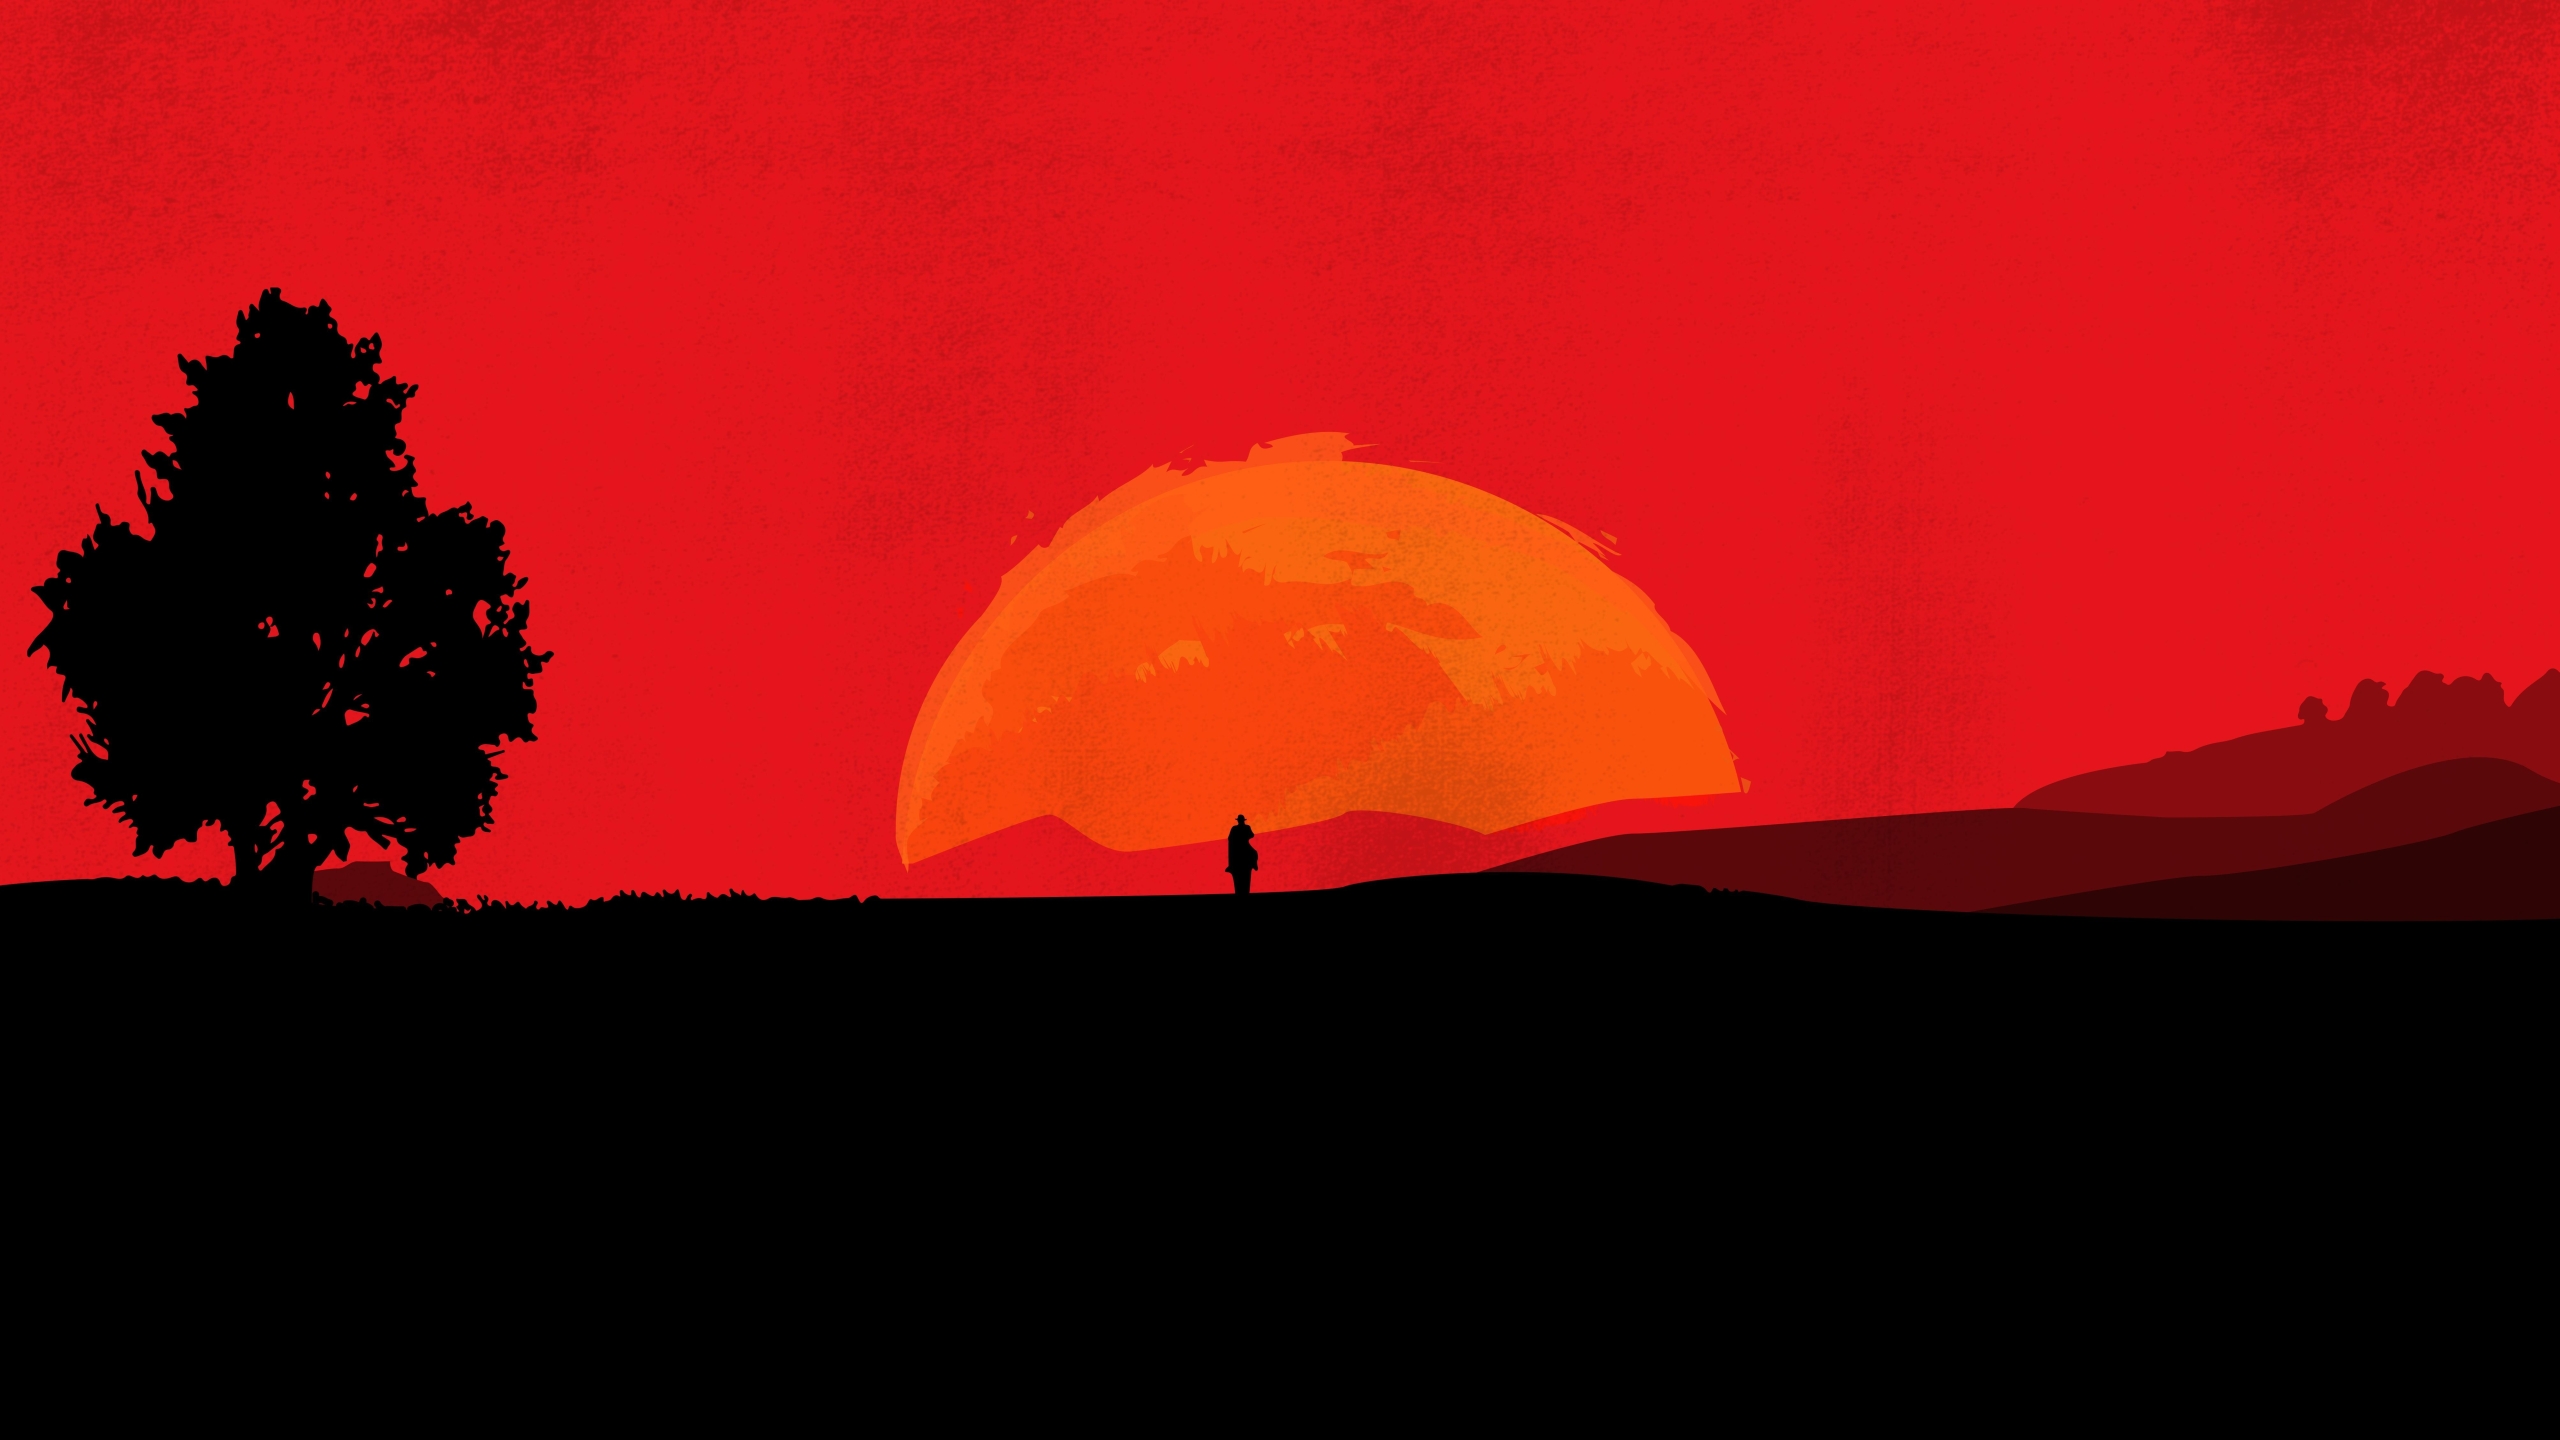 android red dead redemption 2 background